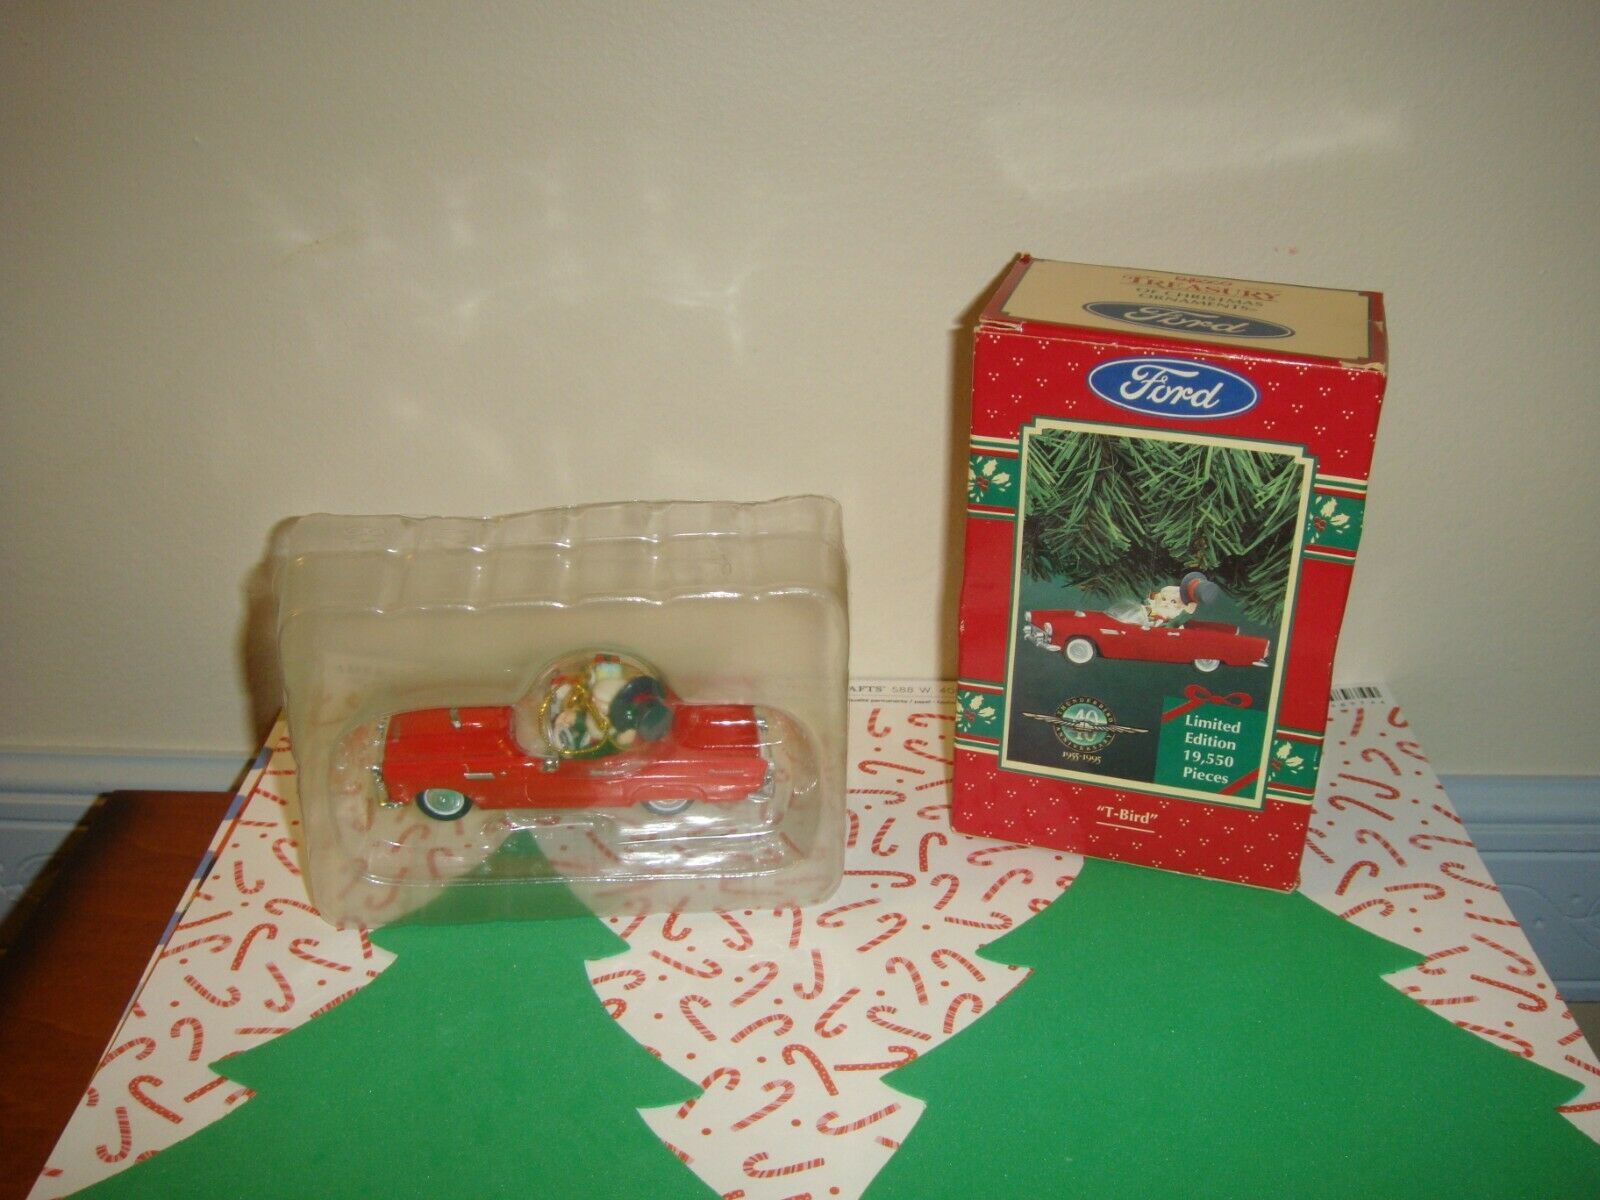 Primary image for Enesco Ford T-bird Limited Edition 40th Anniversary Ornament